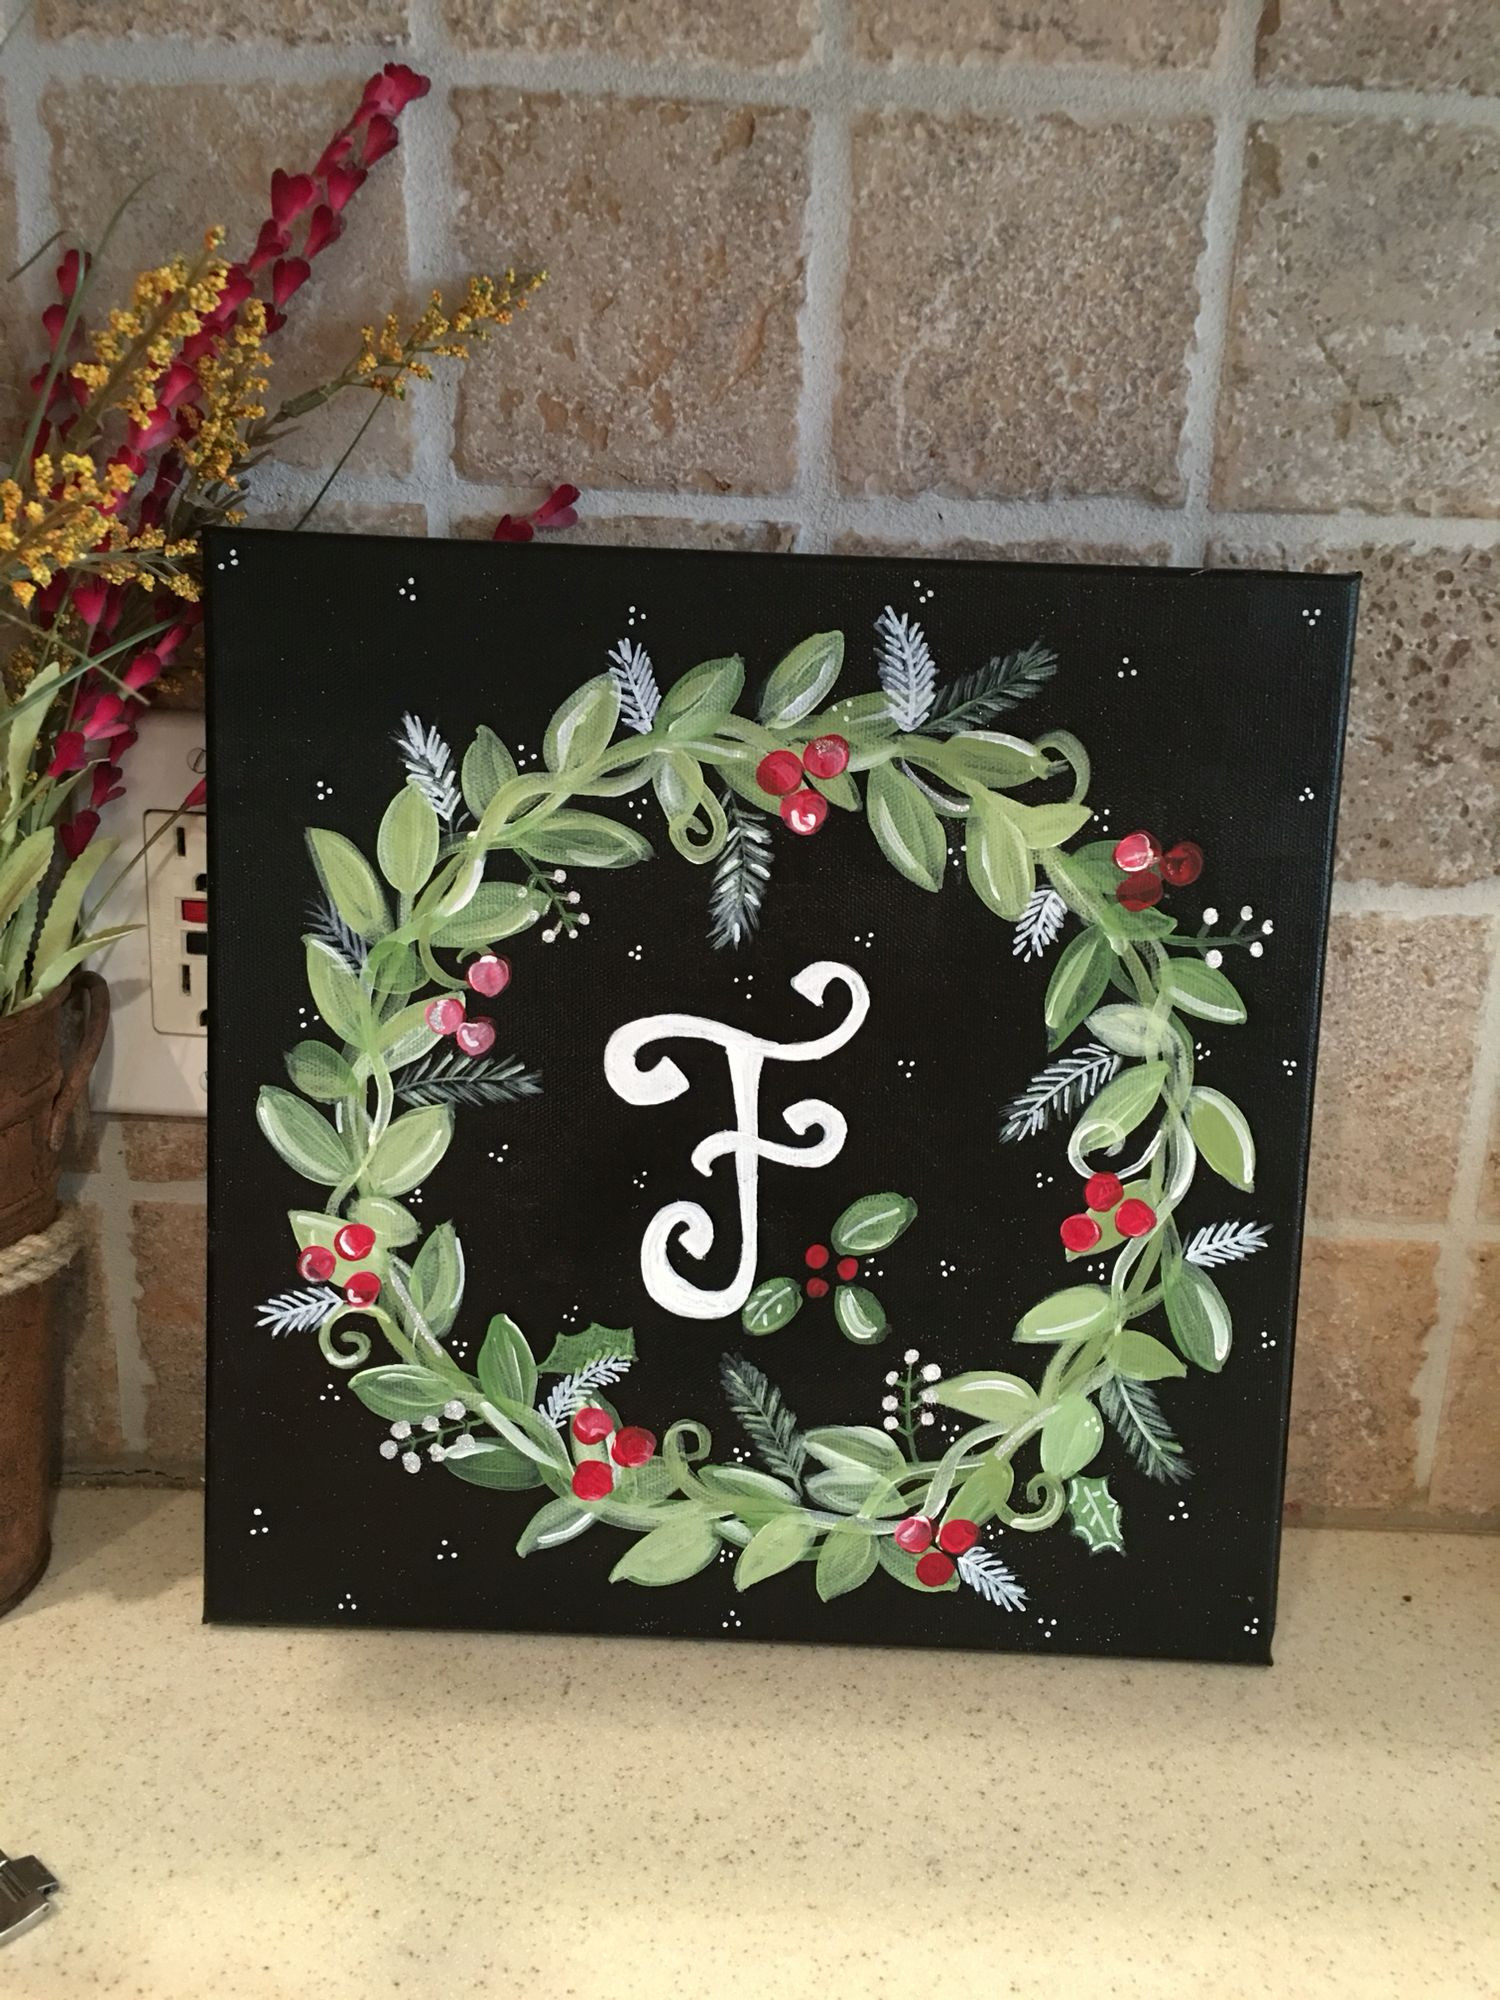 Christmas Canvas Paintings DIY
 Painted canvas Christmas wreath with initial